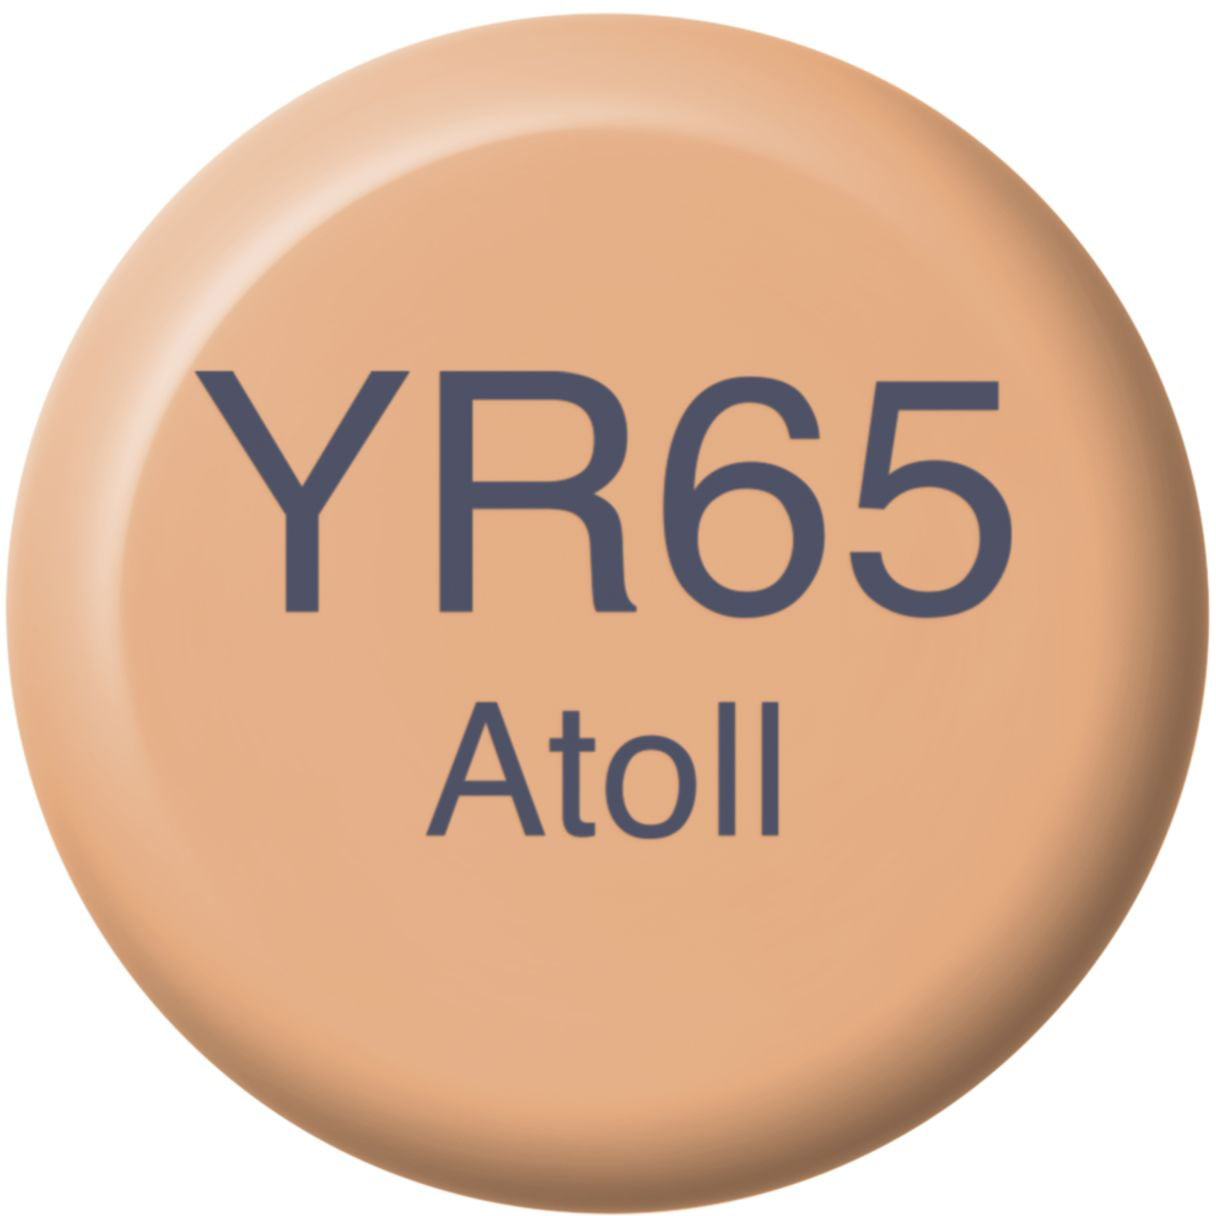 COPIC Ink Refill 21076274 YR65 - Atoll